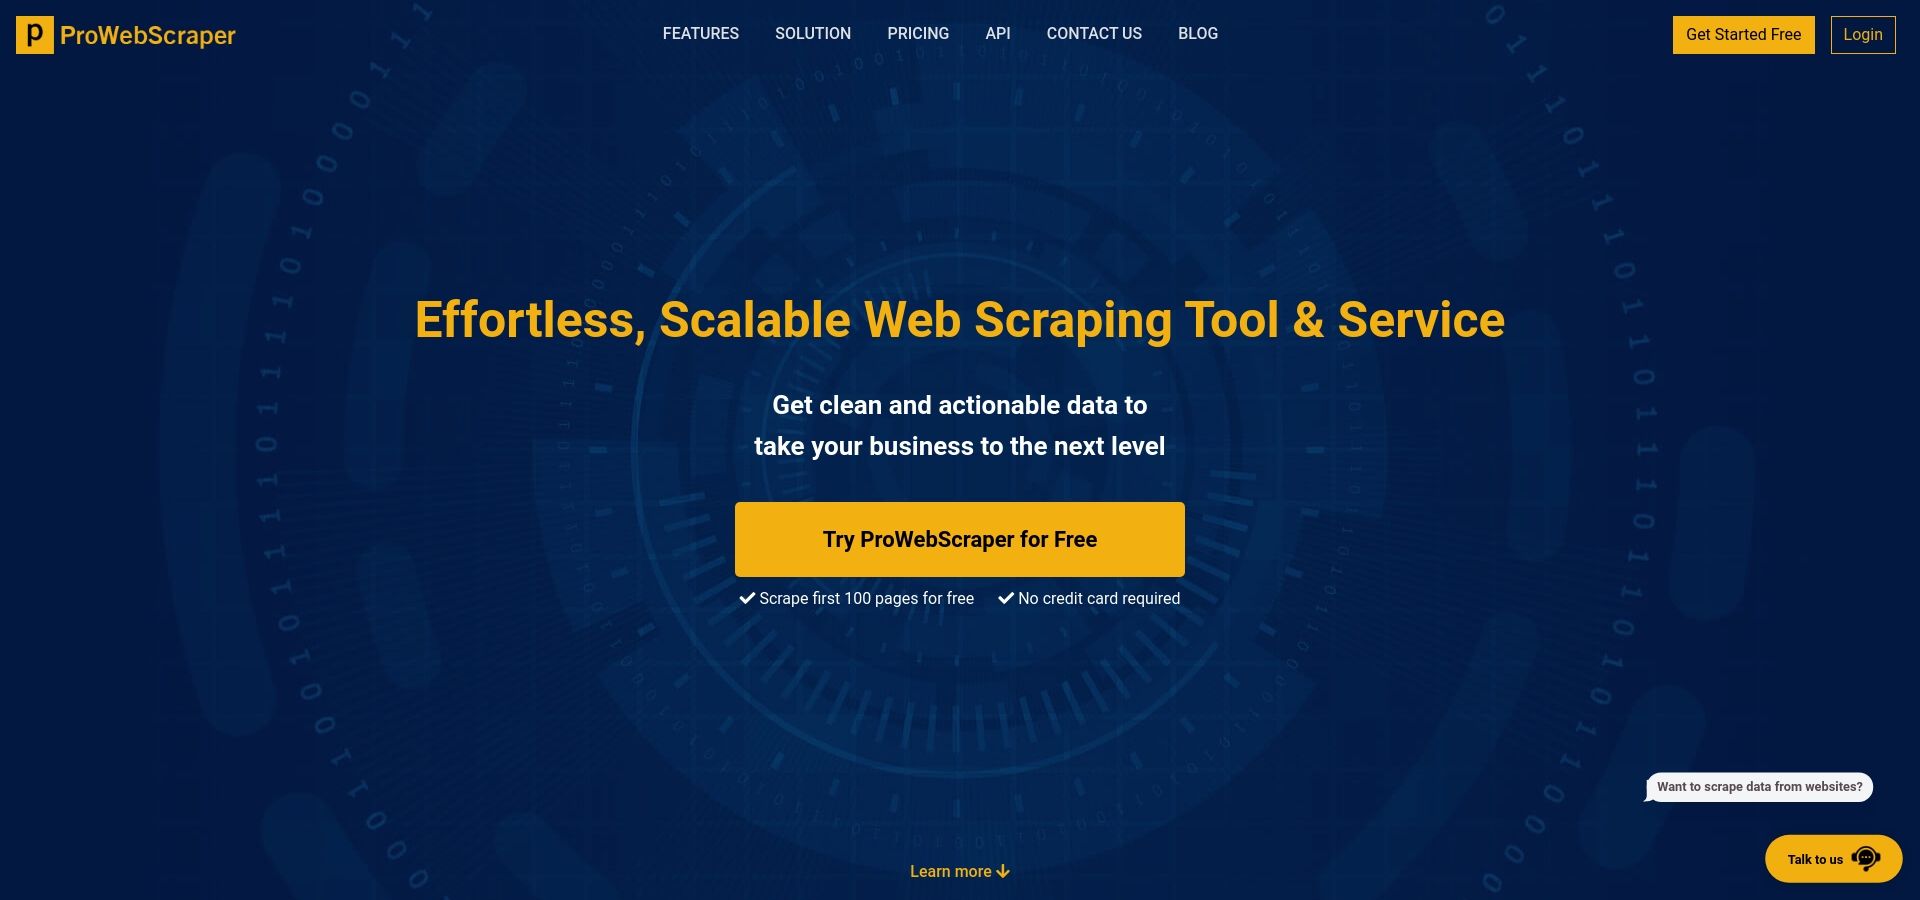 ProWebScraper - Fast and Powerful Web Scraping Tool